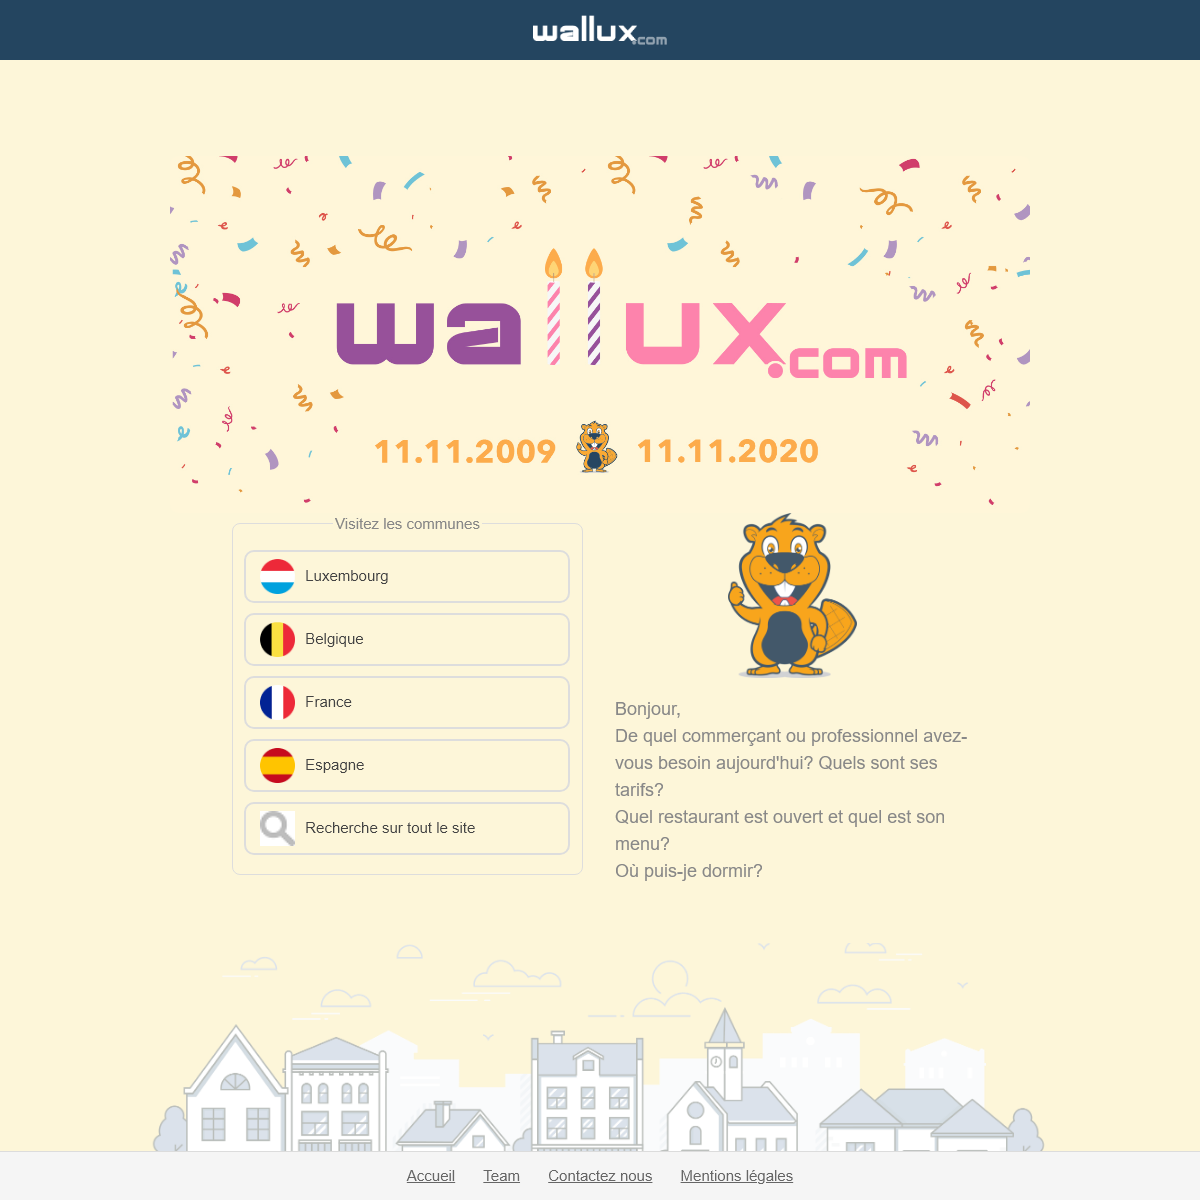 A complete backup of wallux.com